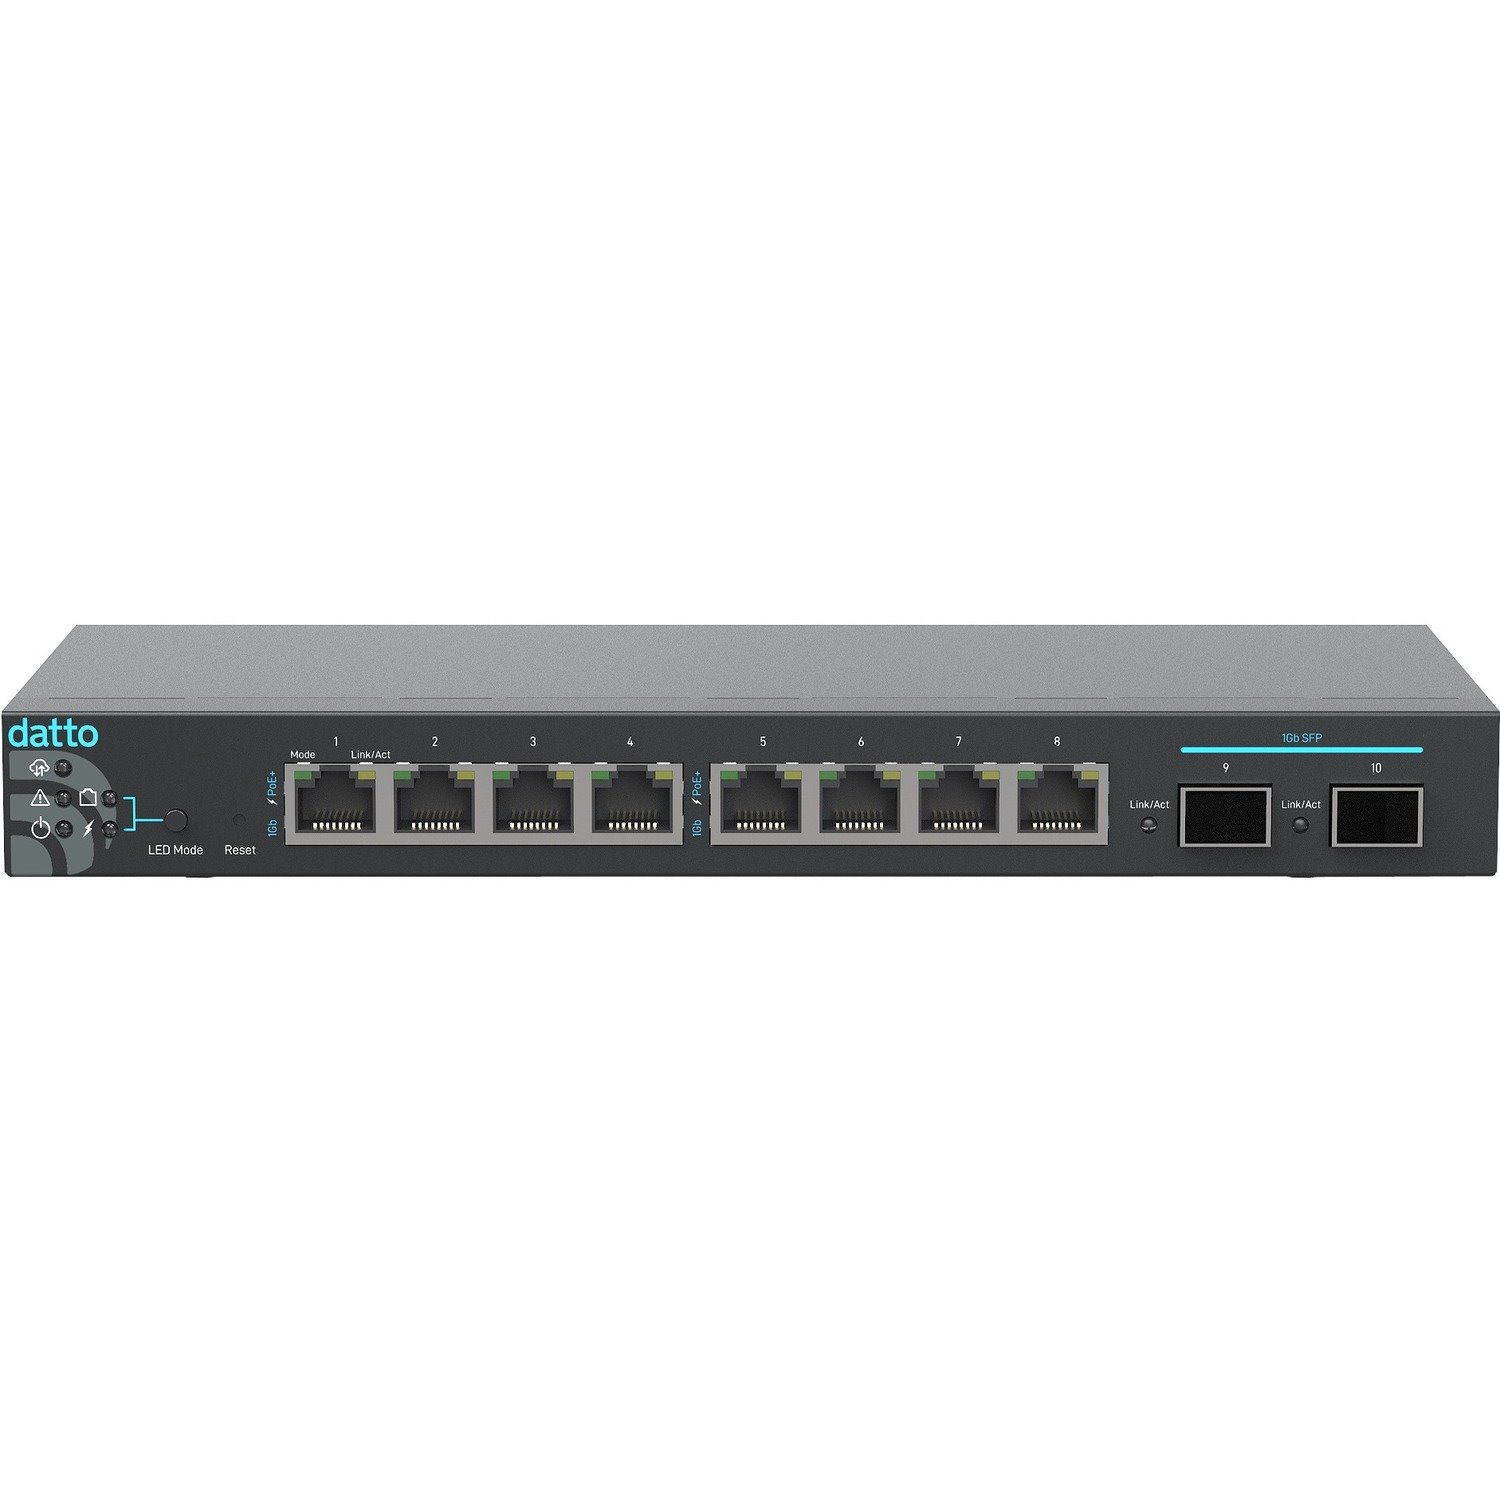 Datto DSW100-8P-2G Ethernet Switch